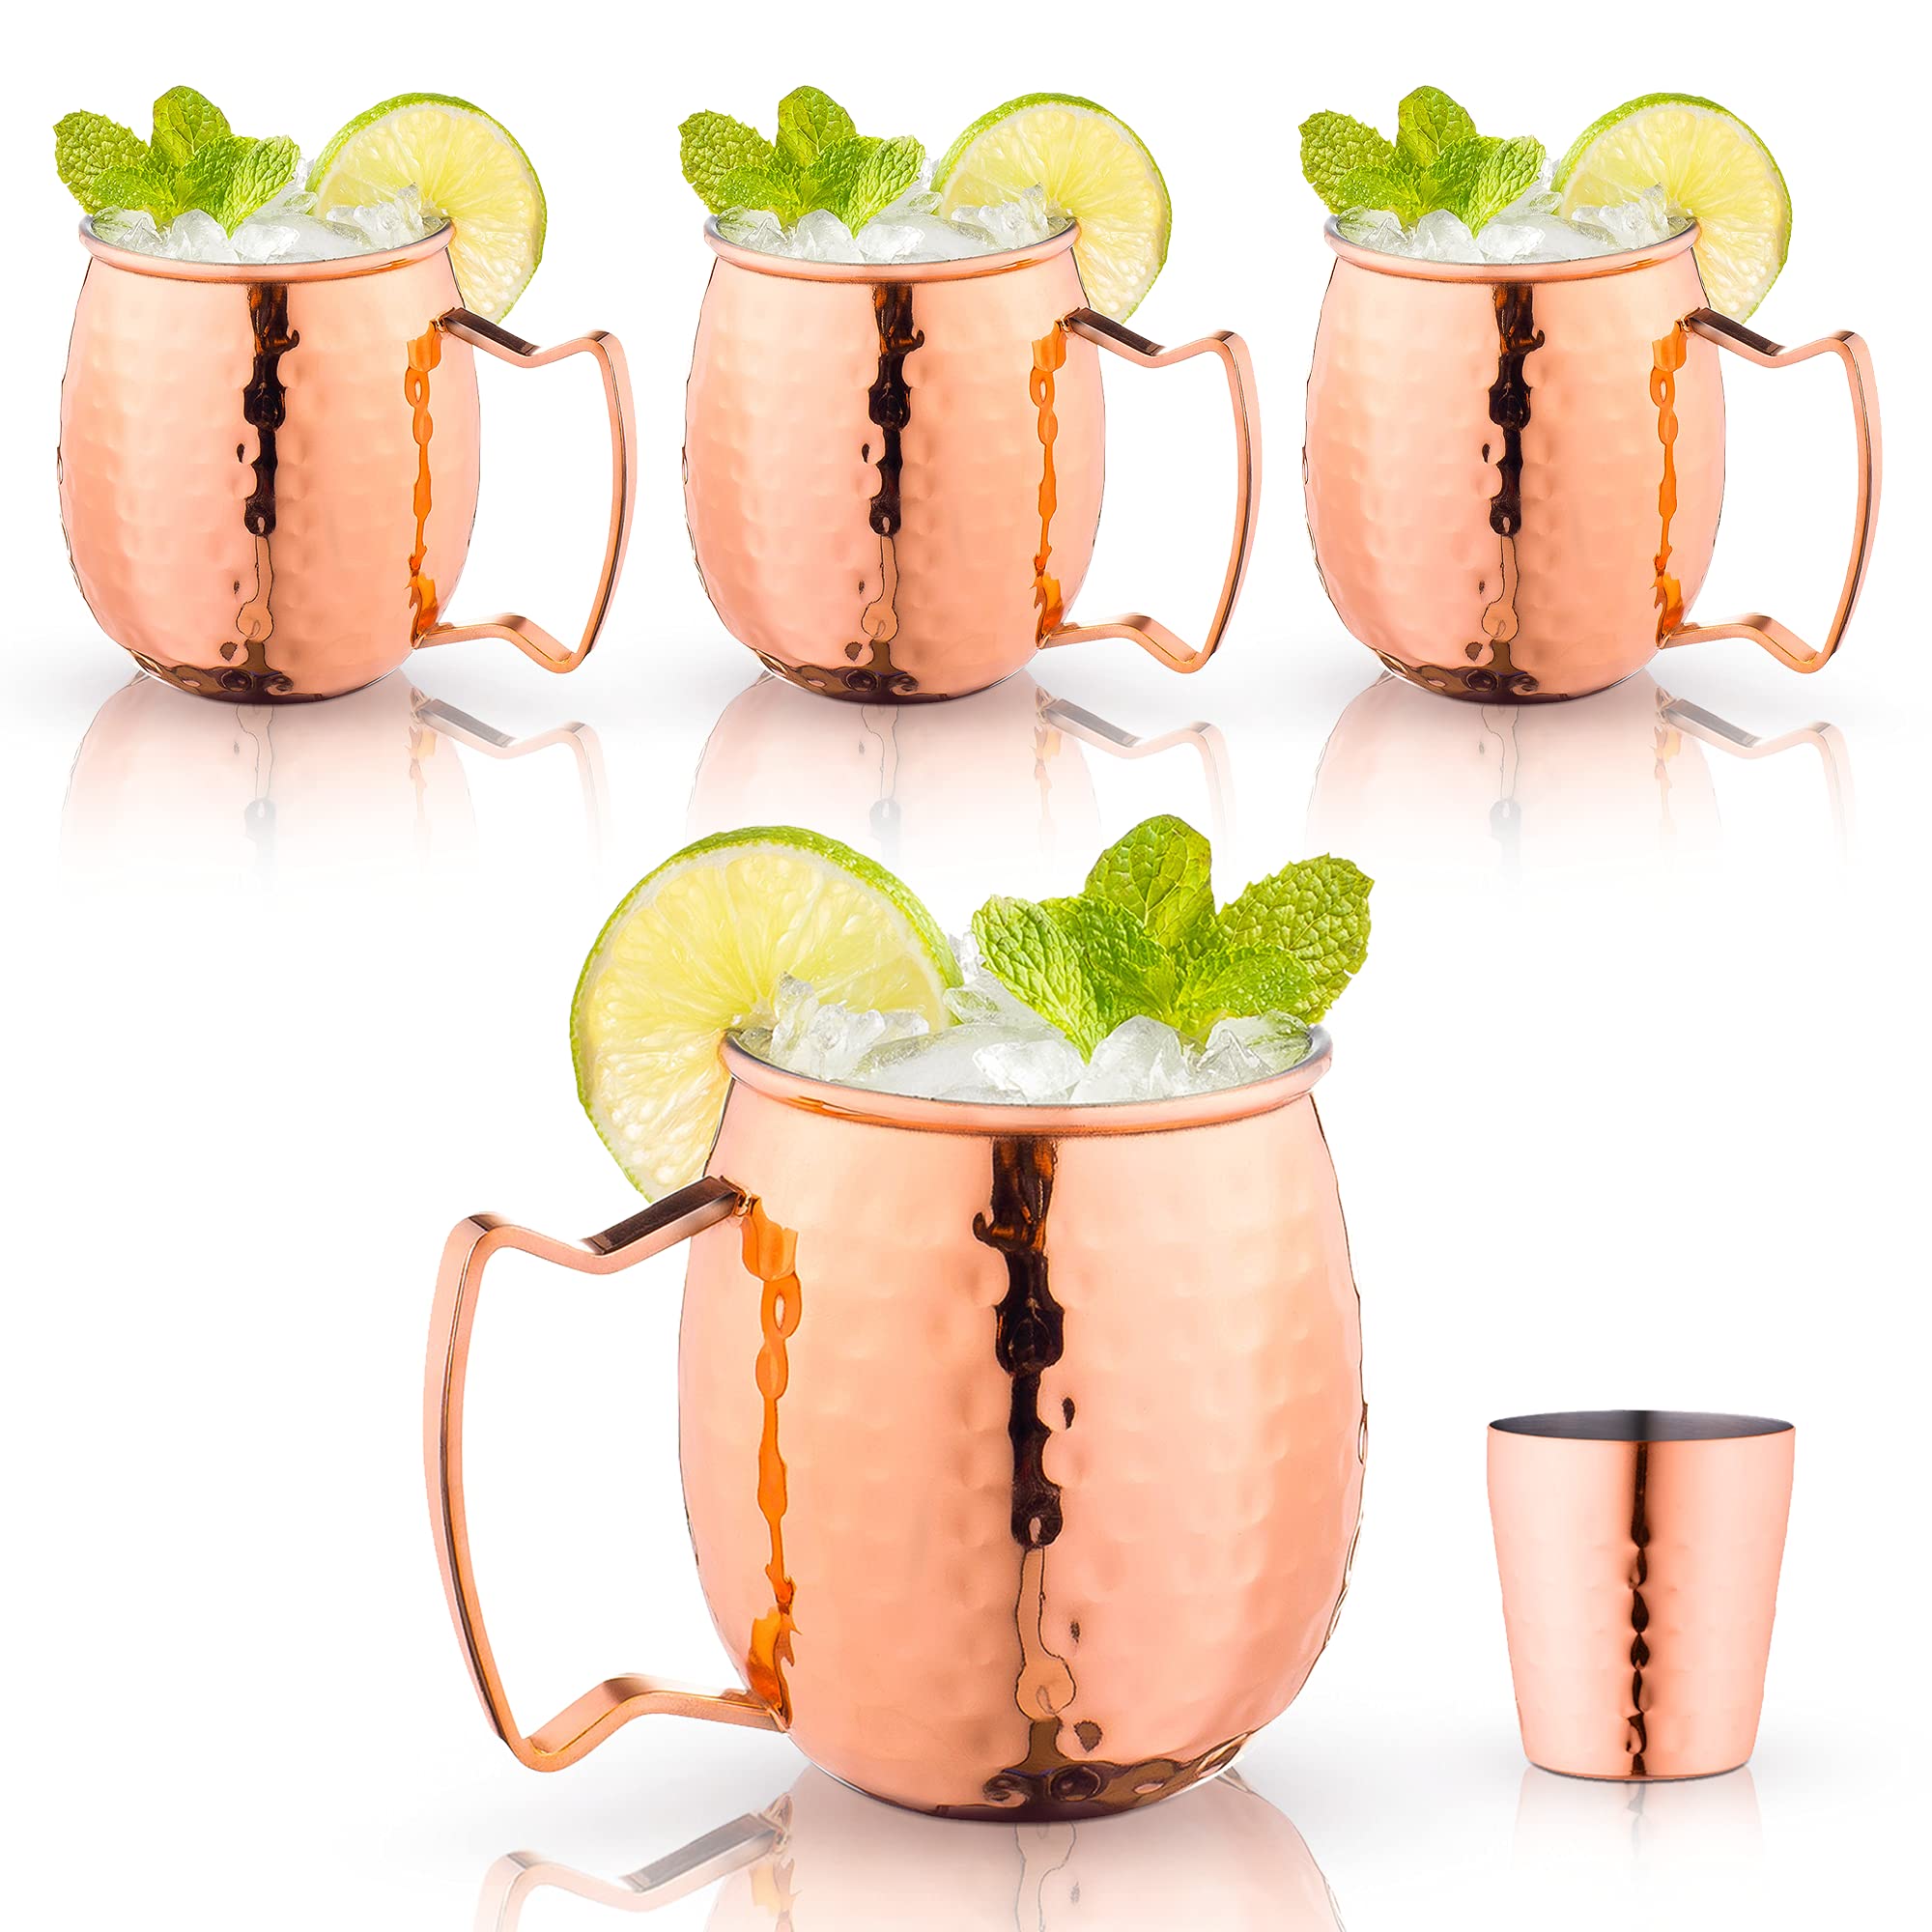 Royalty Art Moscow Mule Mugs - Set of 4 Copper Mugs with Shot Glass - 16oz Classic Cups for Home, Kitchen, and Bar